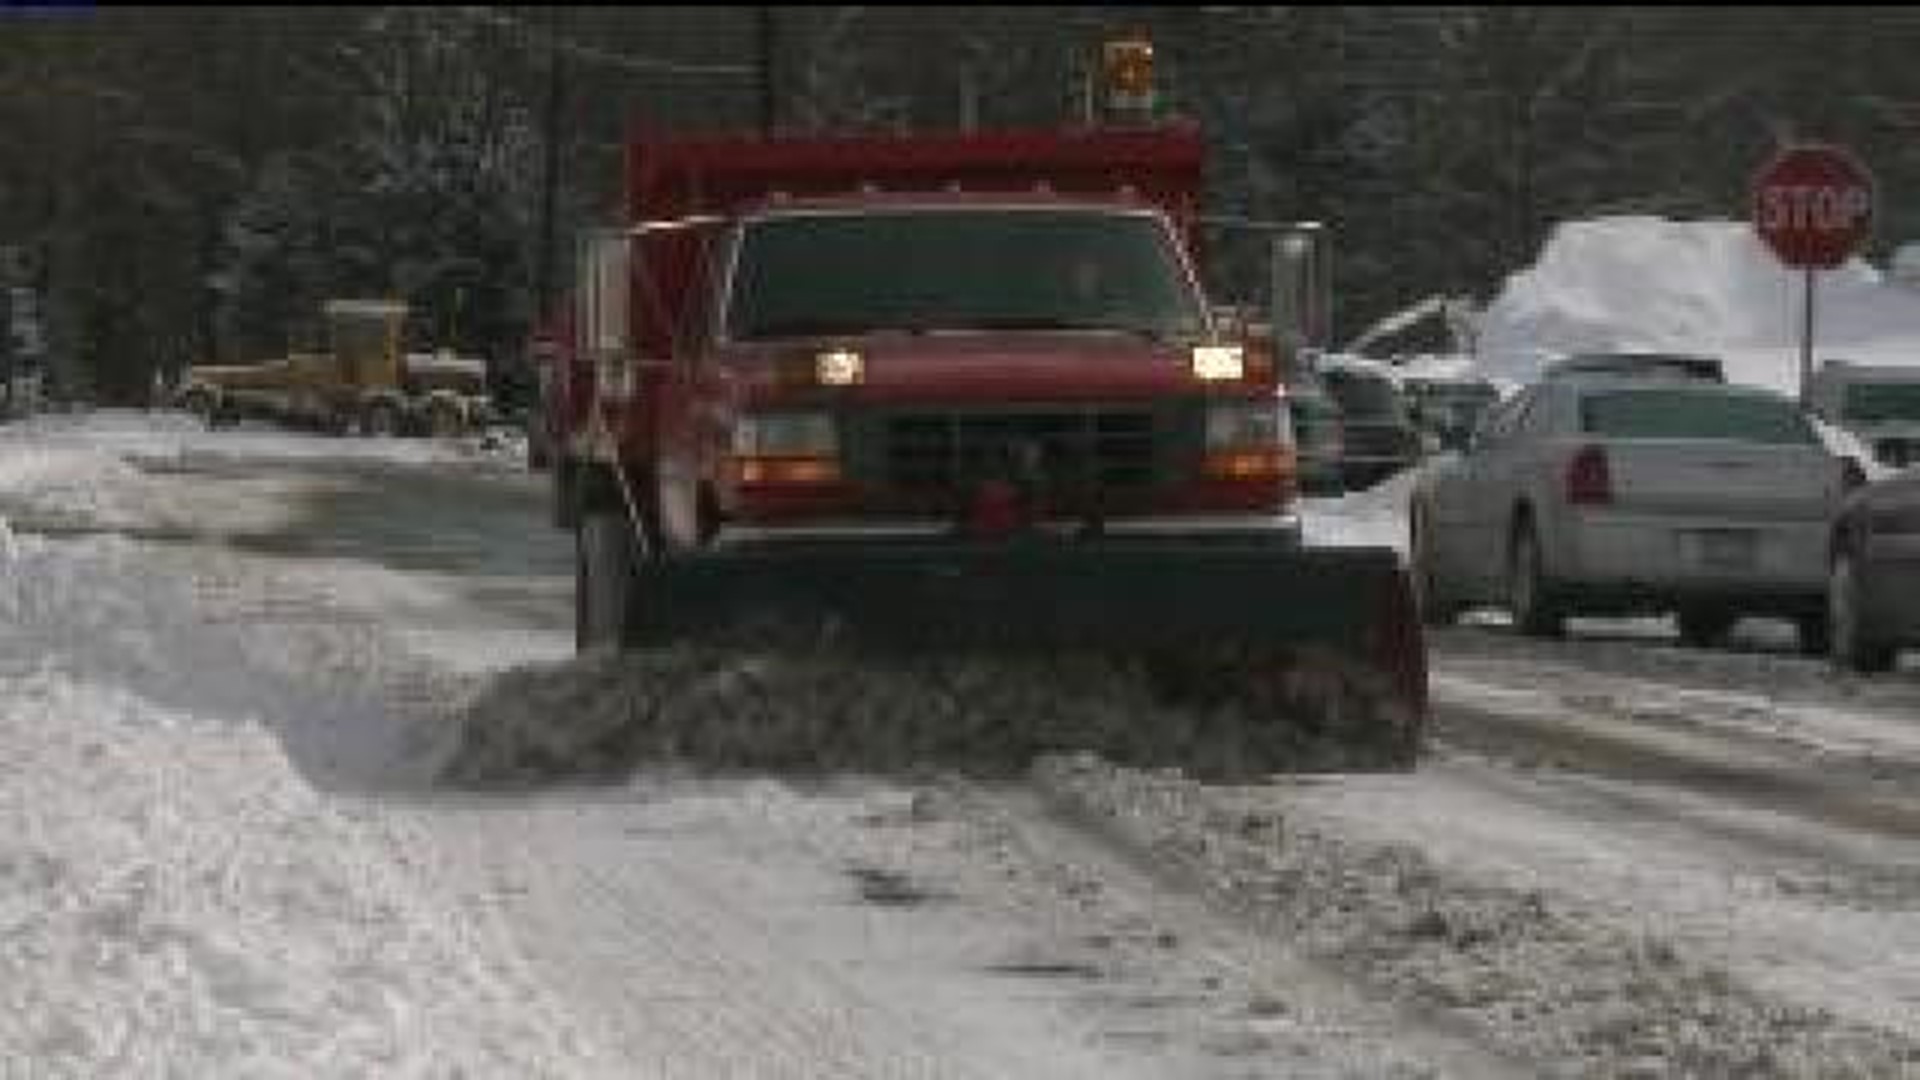 Most Communities Ready For Snowstorms